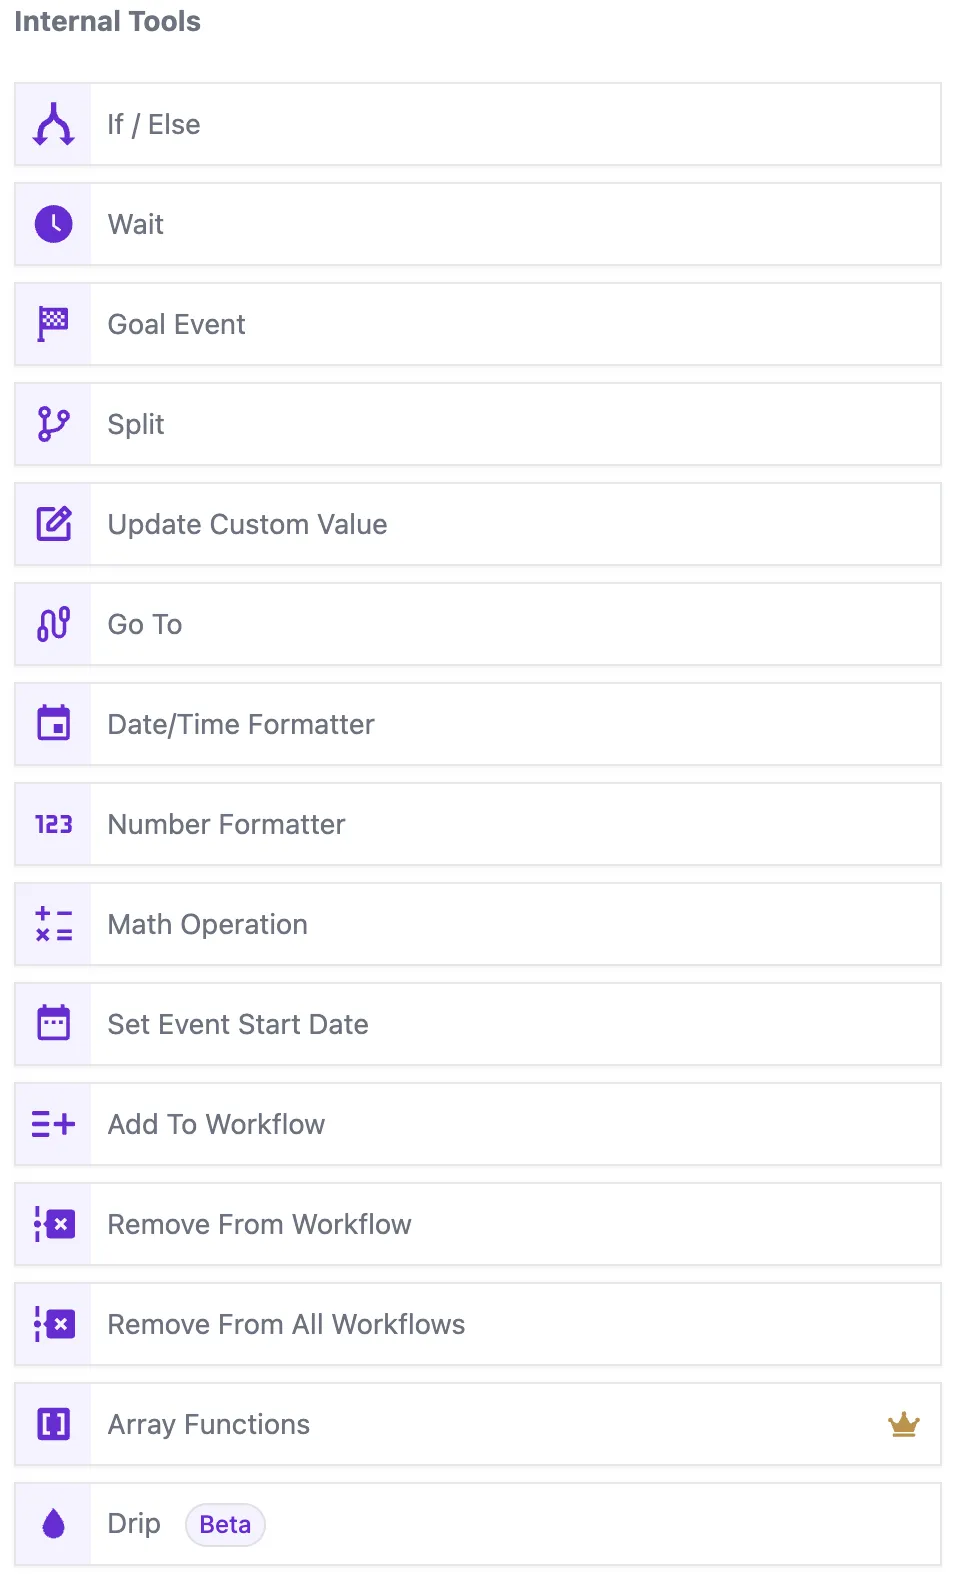 eGrowthLab internal tool actions